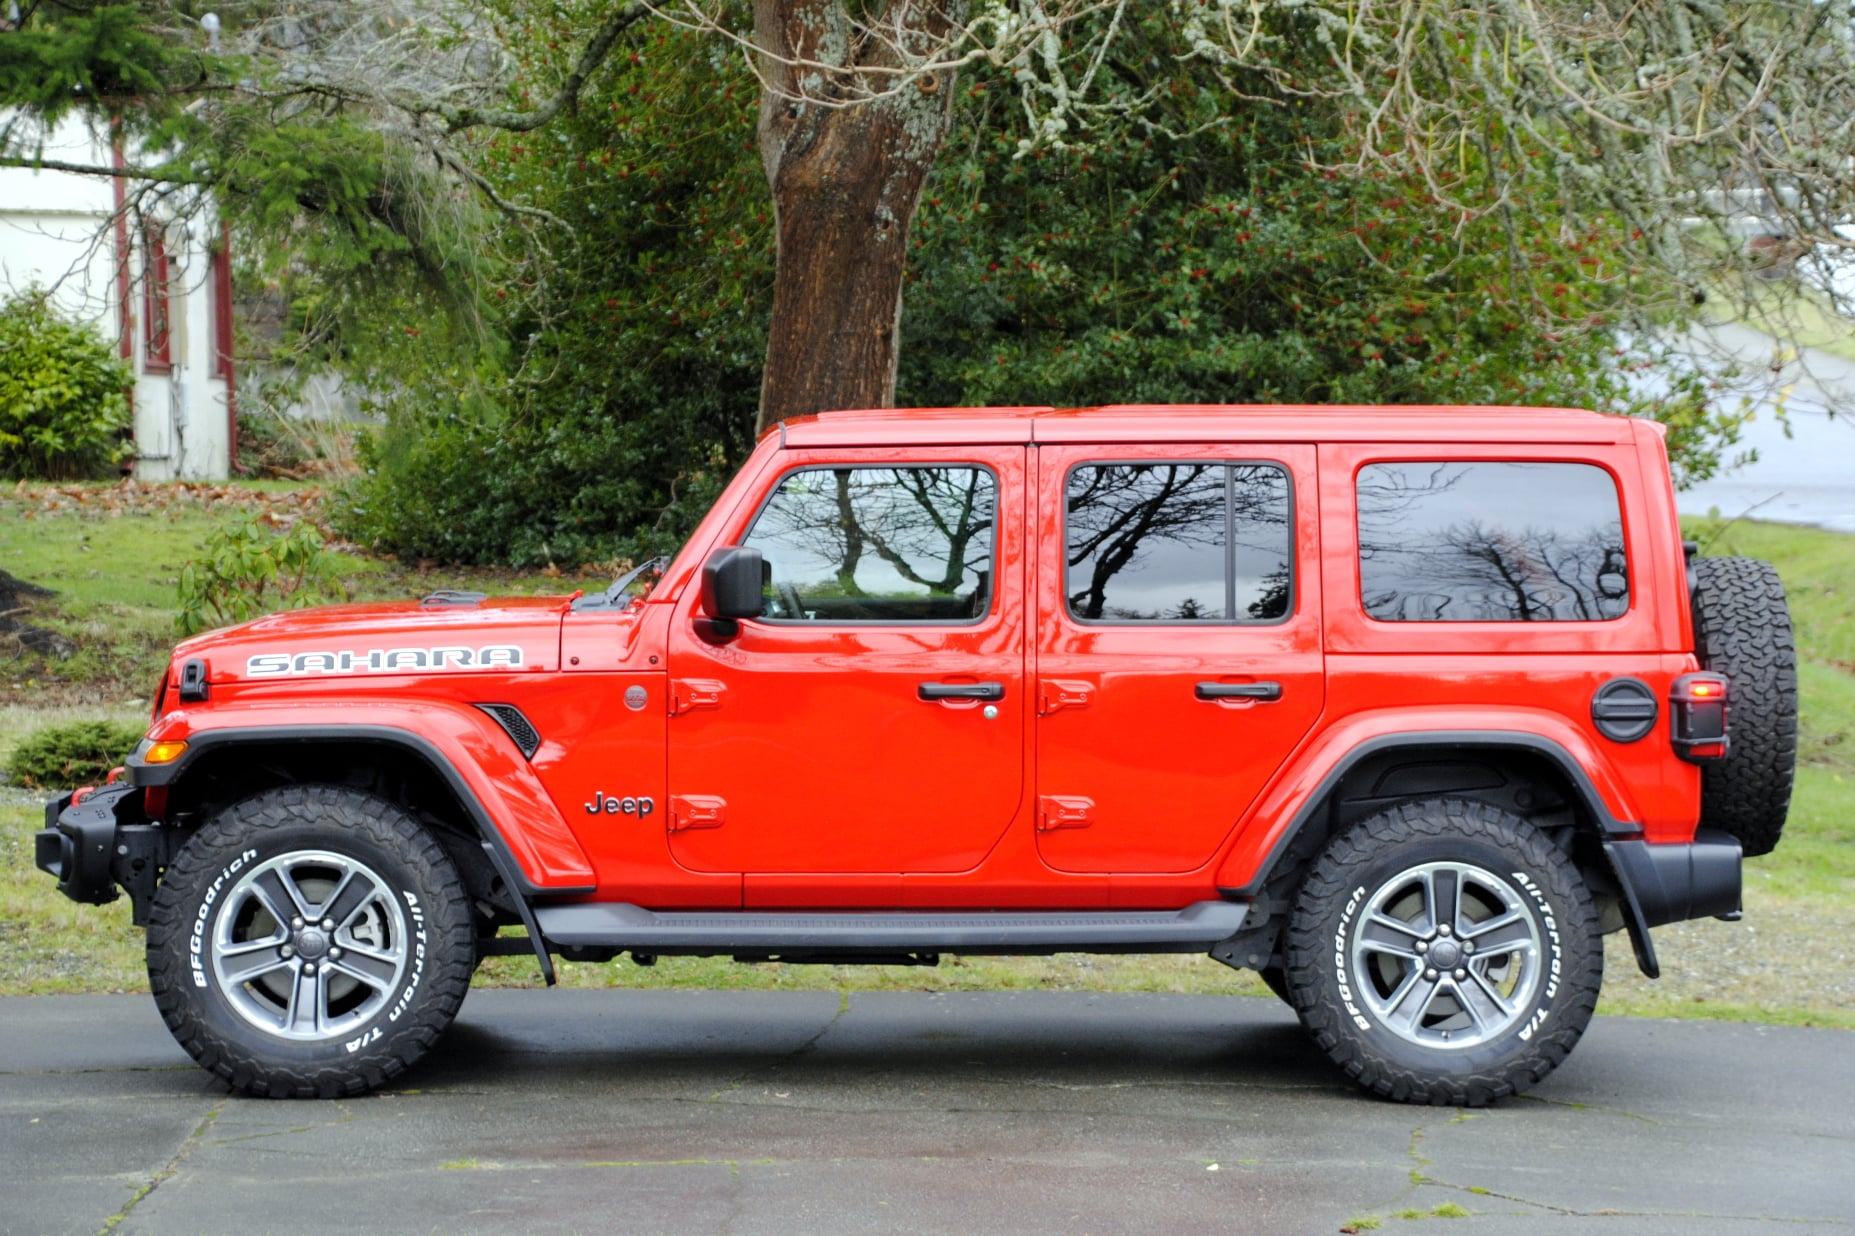 17 or 18 inch wheels on 33 inch tires | Jeep Wrangler Forum